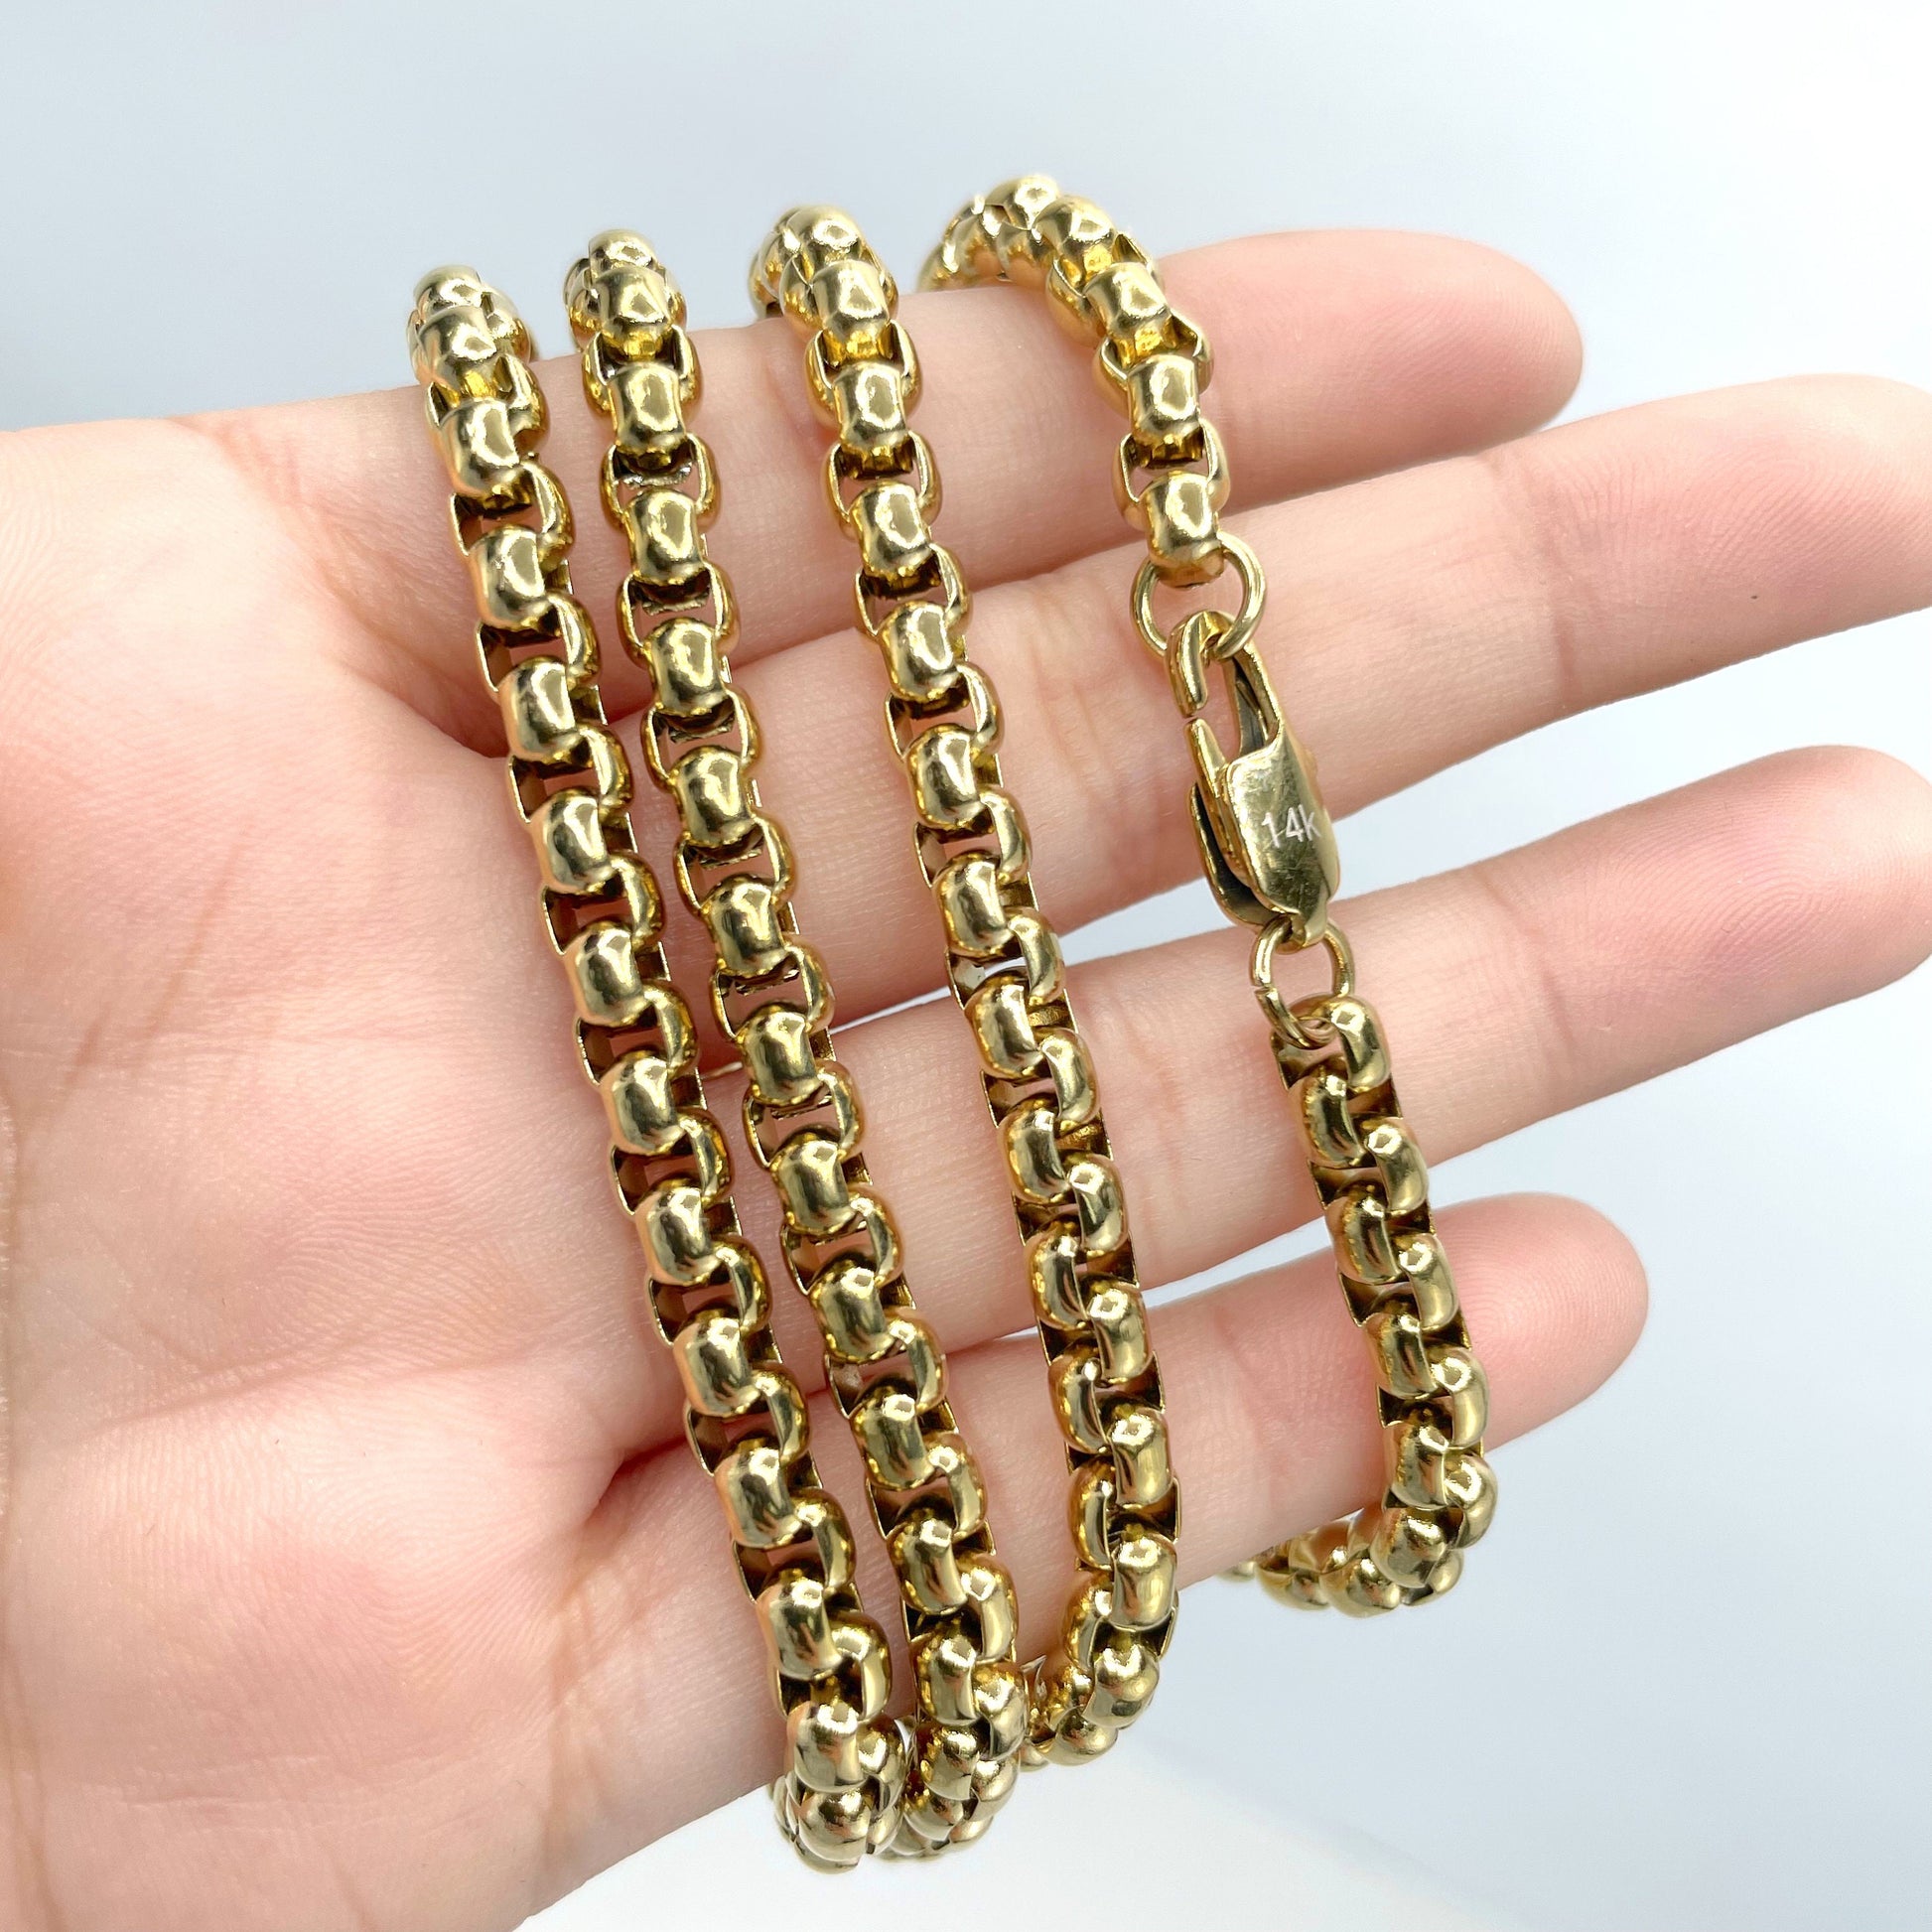 14k Gold Plated On Stainless Steel 5mm Box Chain Link Necklace 30" Long, Unisex Chain, Wholesale Jewelry Making Supplies